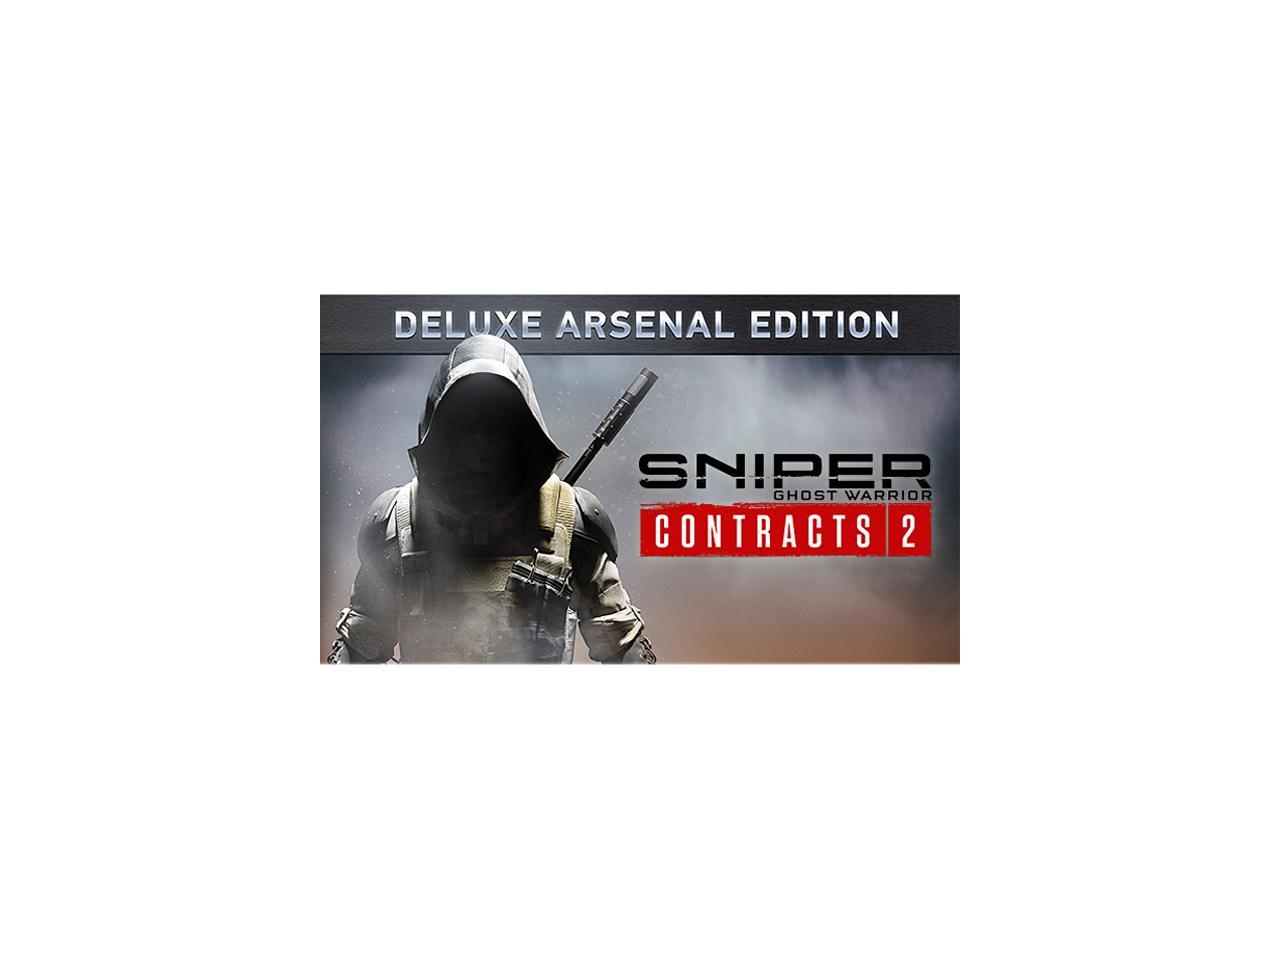 sniper ghost warrior contracts 2 deluxe arsenal edition